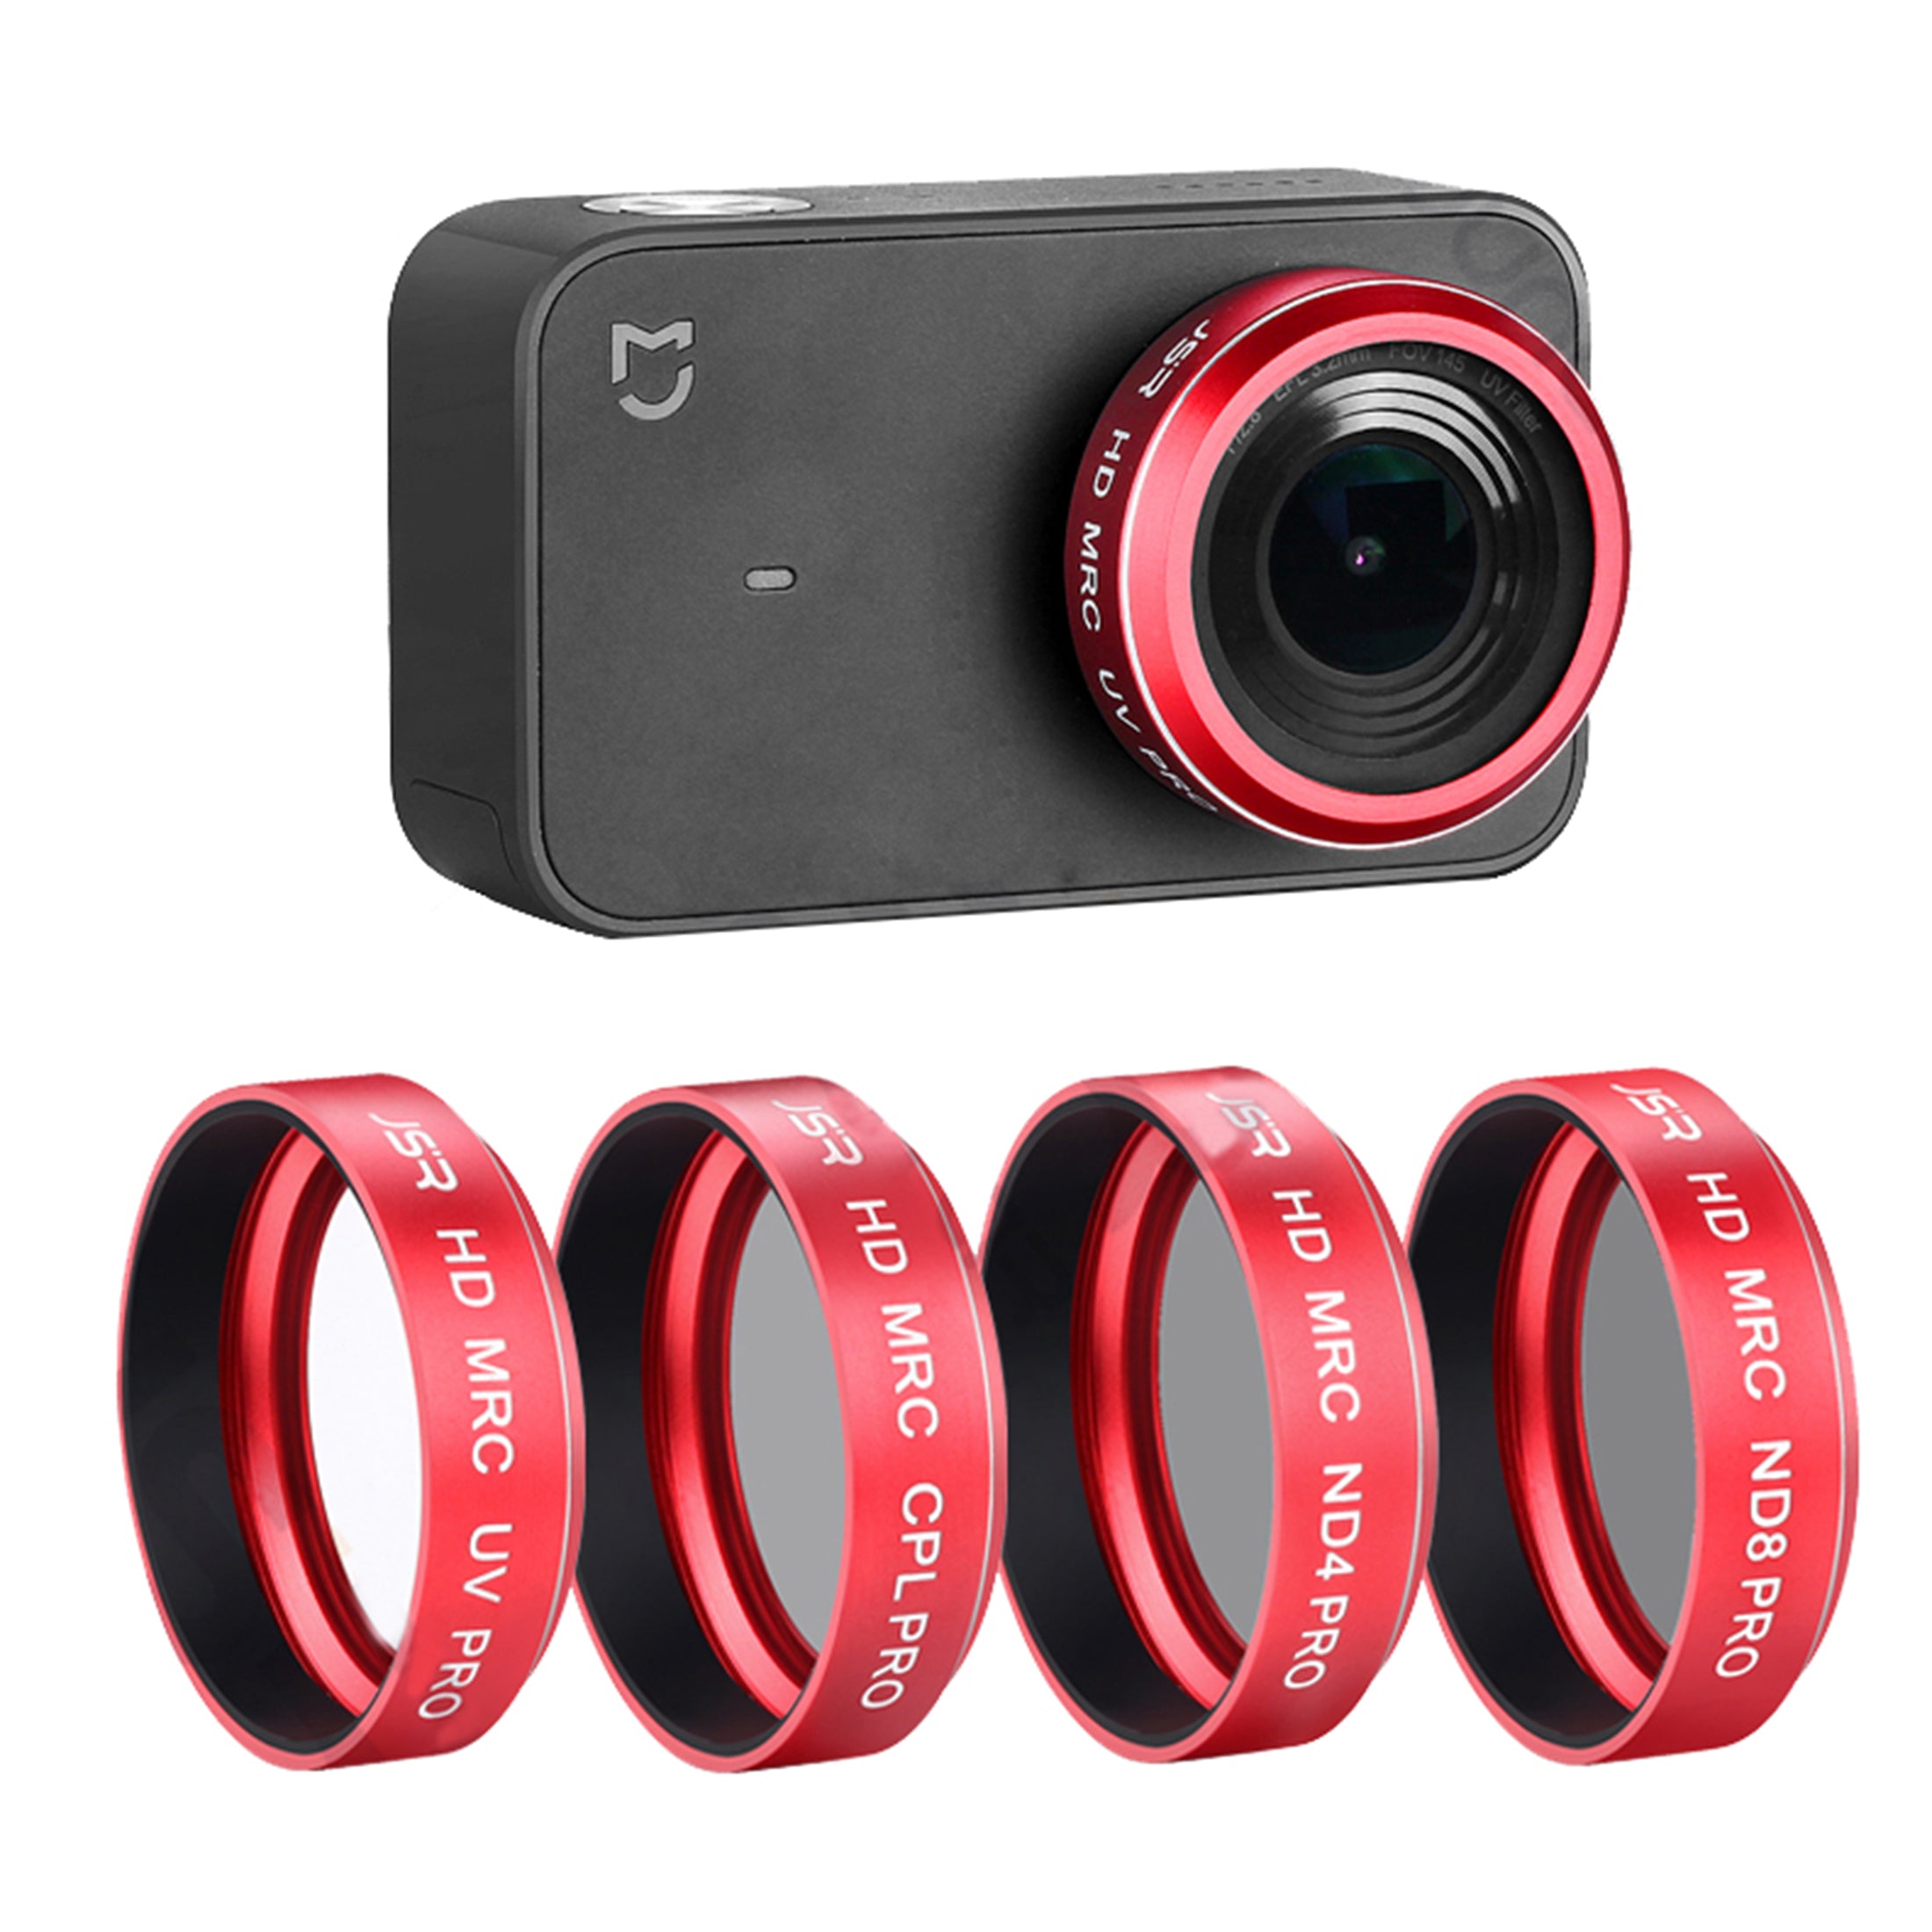 AT-M25 4-in-1 ND4 + ND8 + CPL + UV Lens Filter Kit for Xiaomi Mi Mijia Mini Action Camera